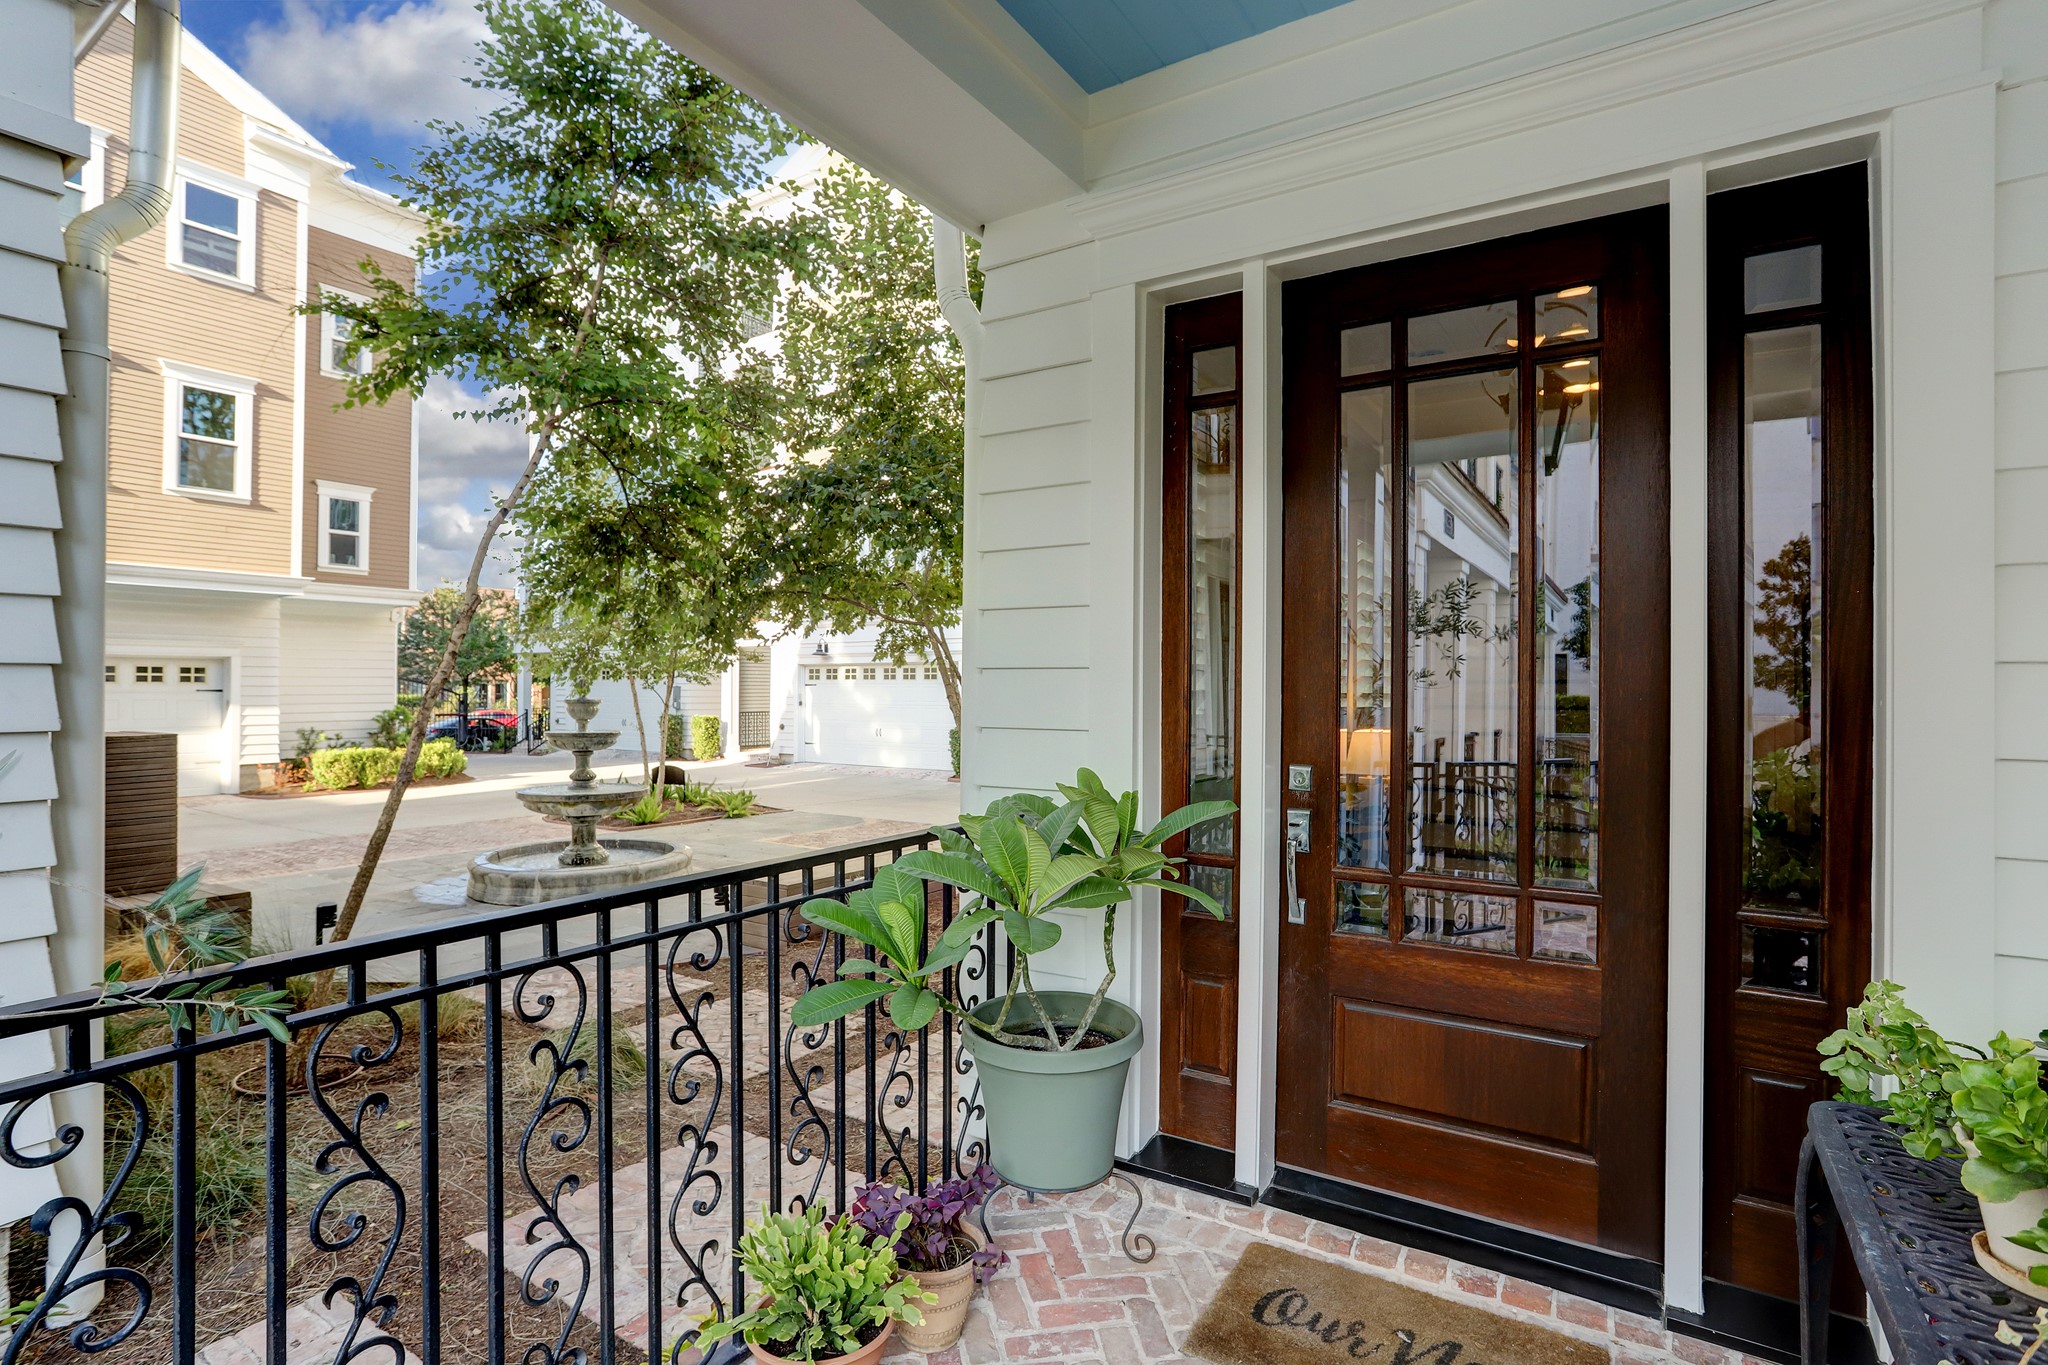 As you walk up to the handsome hardwood front door, you'll hear the trickling fountain where you'll find additional parking and community mailboxes. Shall we go inside?